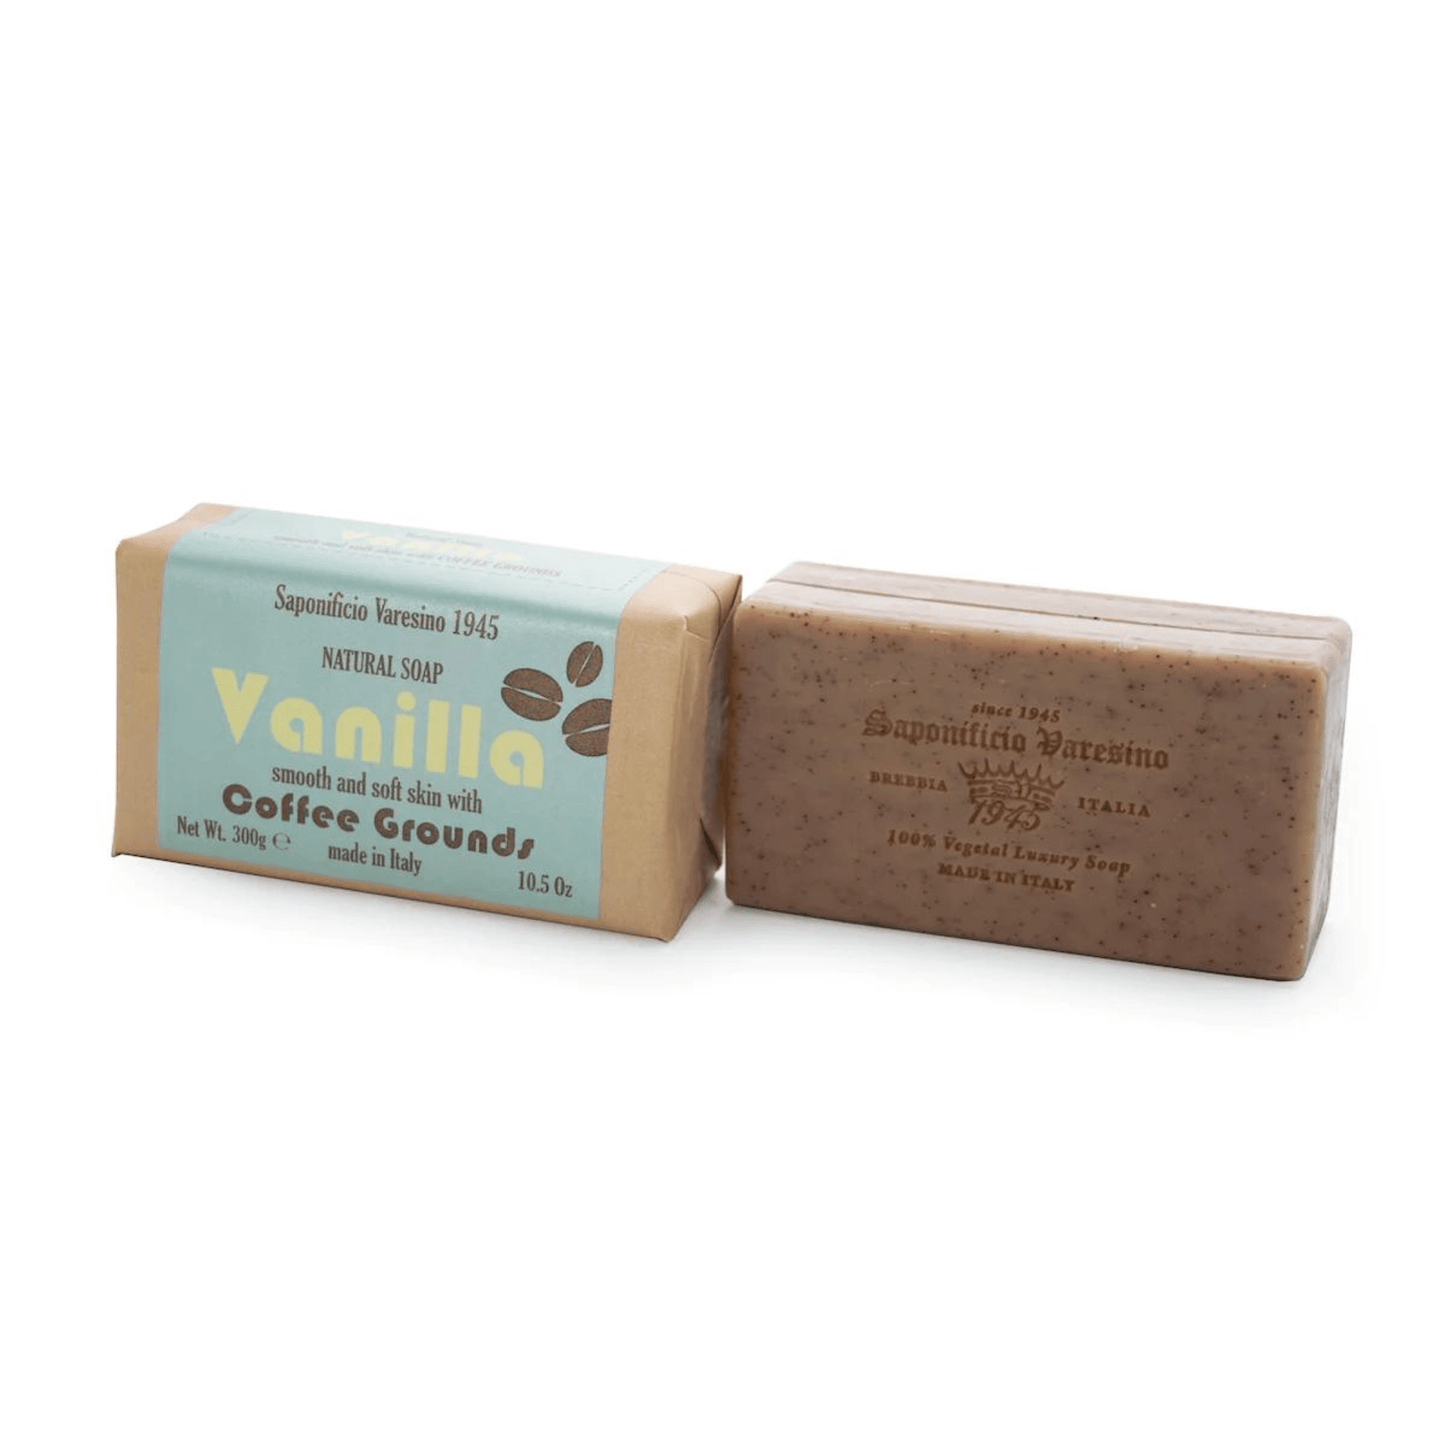 Primary Image of Vanilla Soap with Coffee Grounds